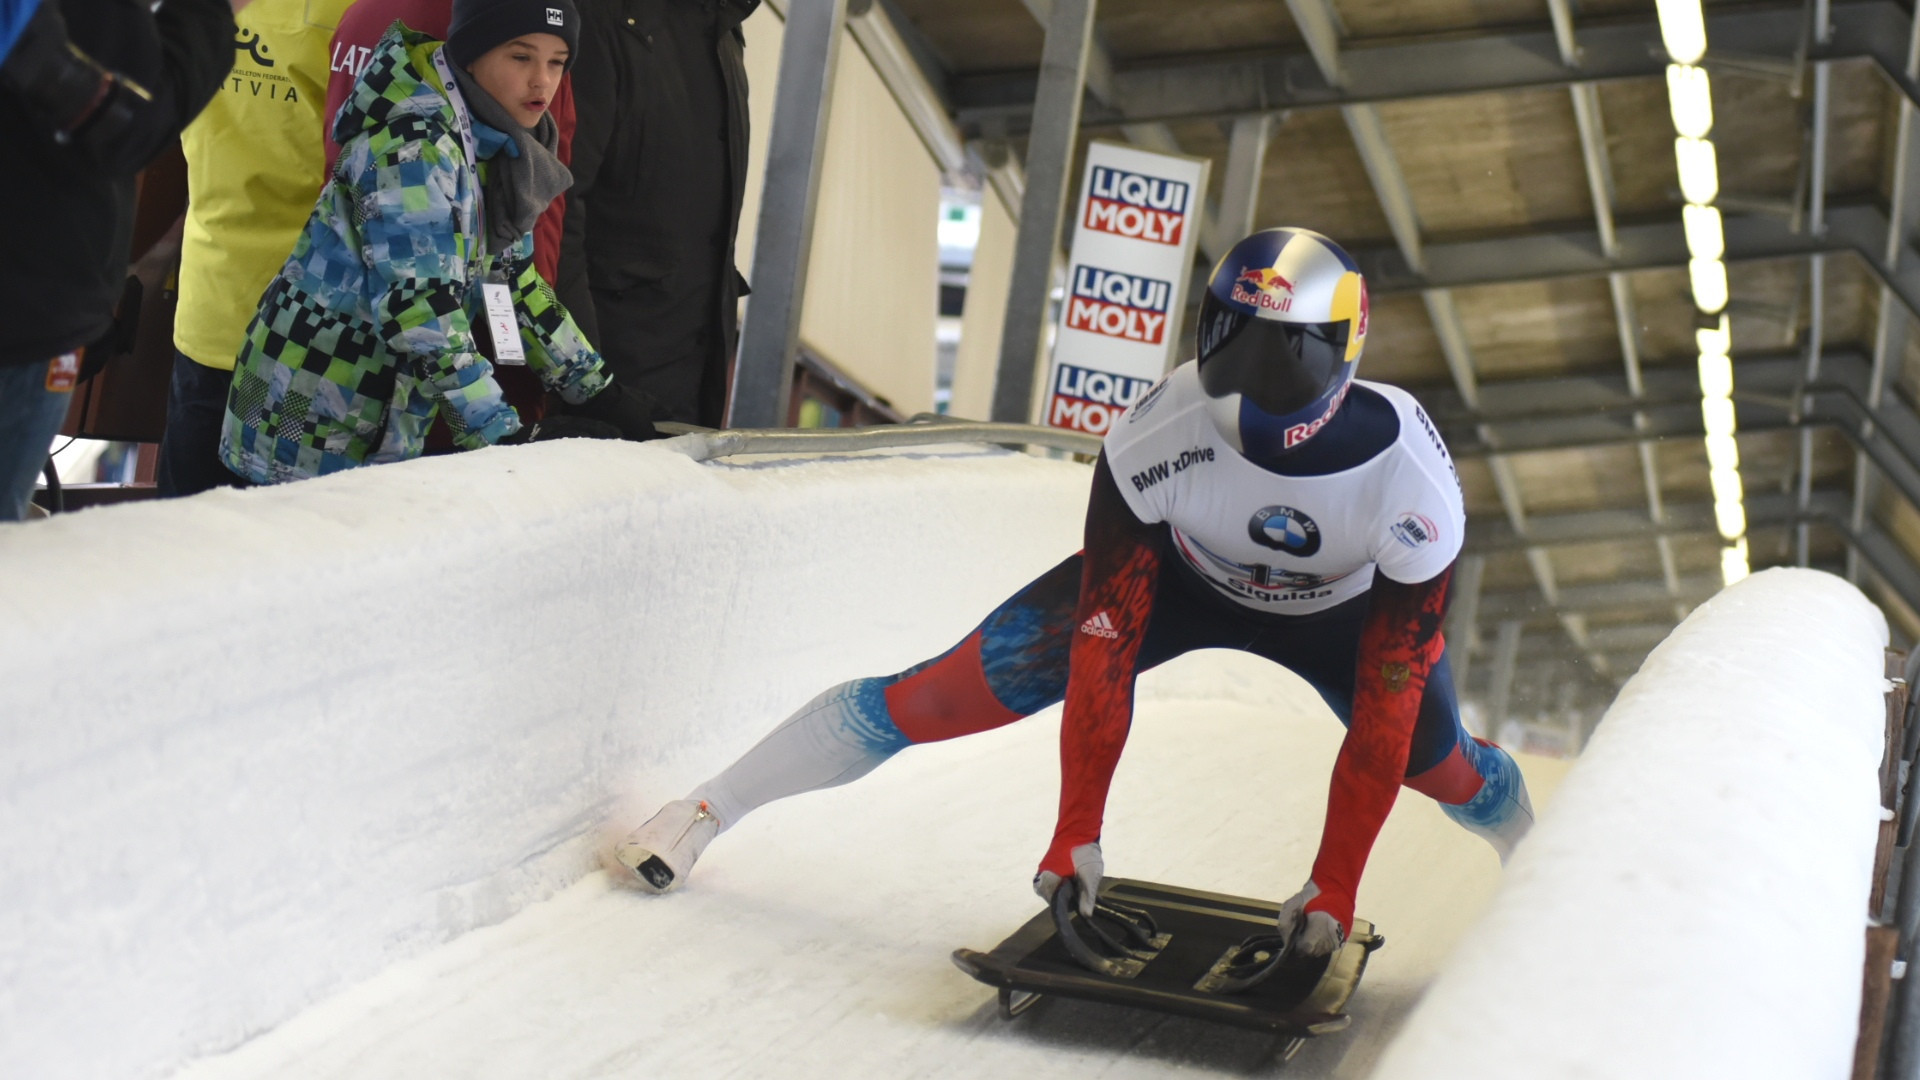 Russian skeleton racer Tregubov secures first IBSF World Cup win in Sigulda 